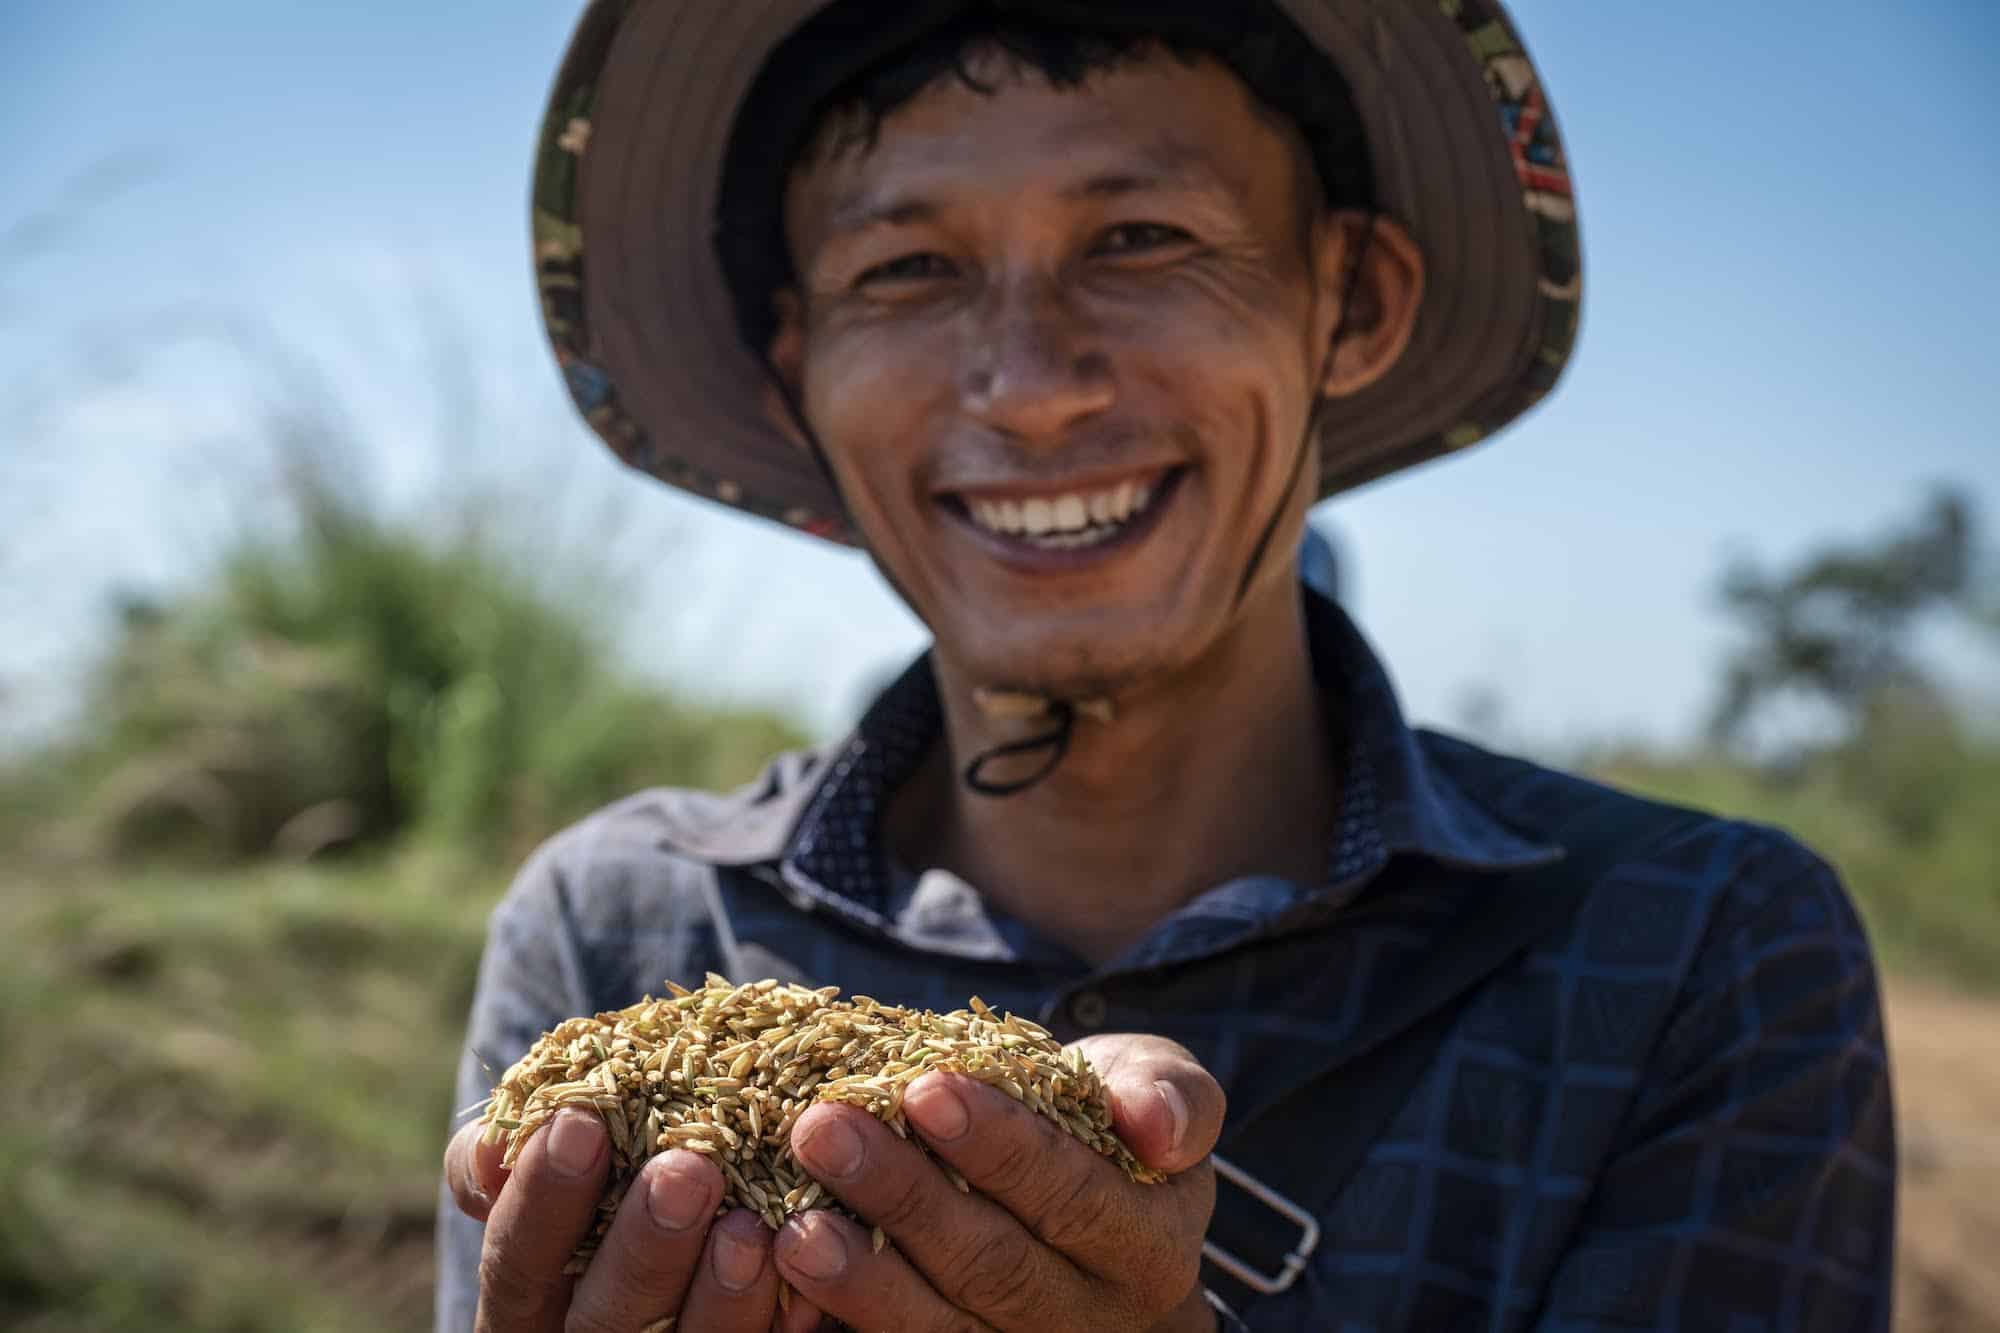 APOPO Mine Action "Minefields to Rice Fields" project helps farmers increase their yield.